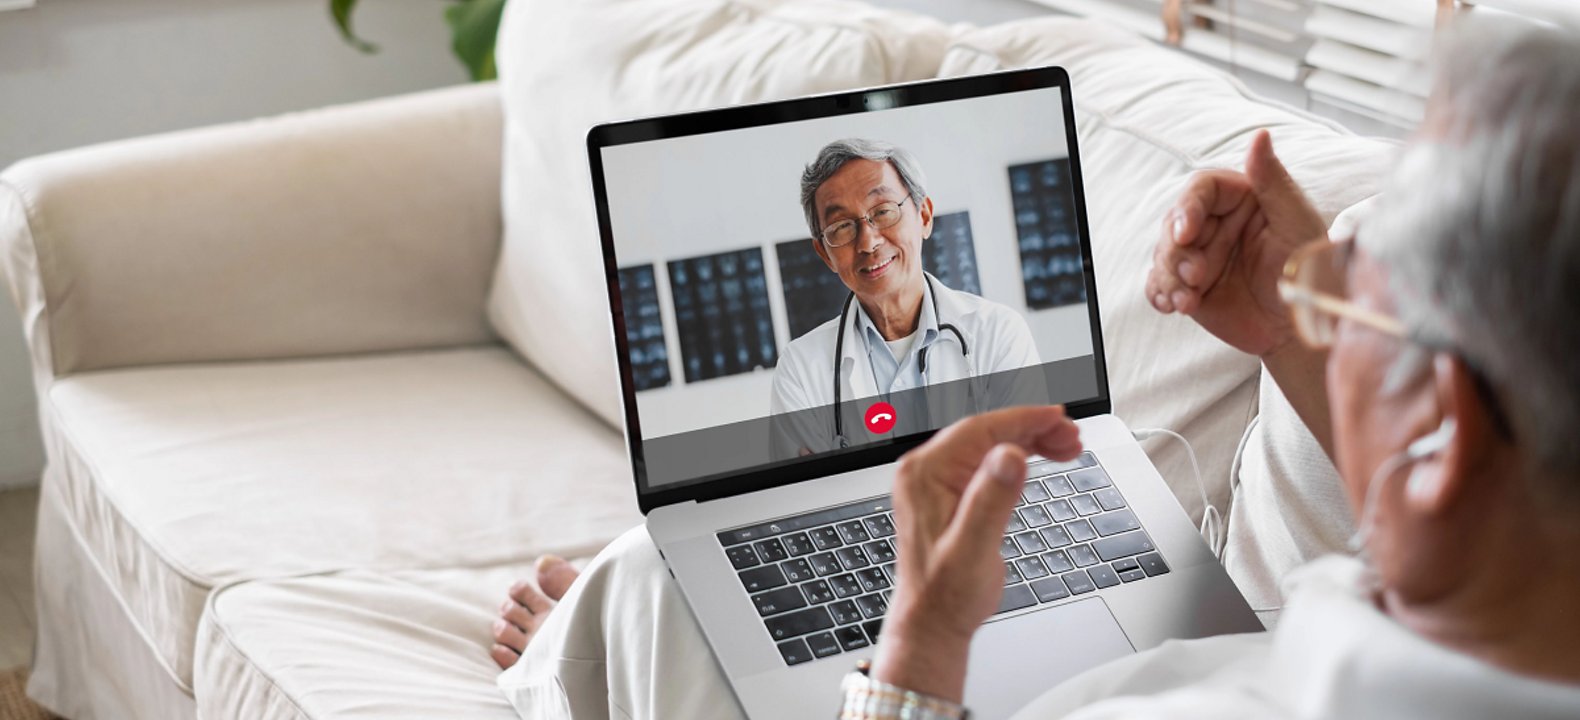 An older man meets with his doctor at a telehealth appointment from a couch in his home.